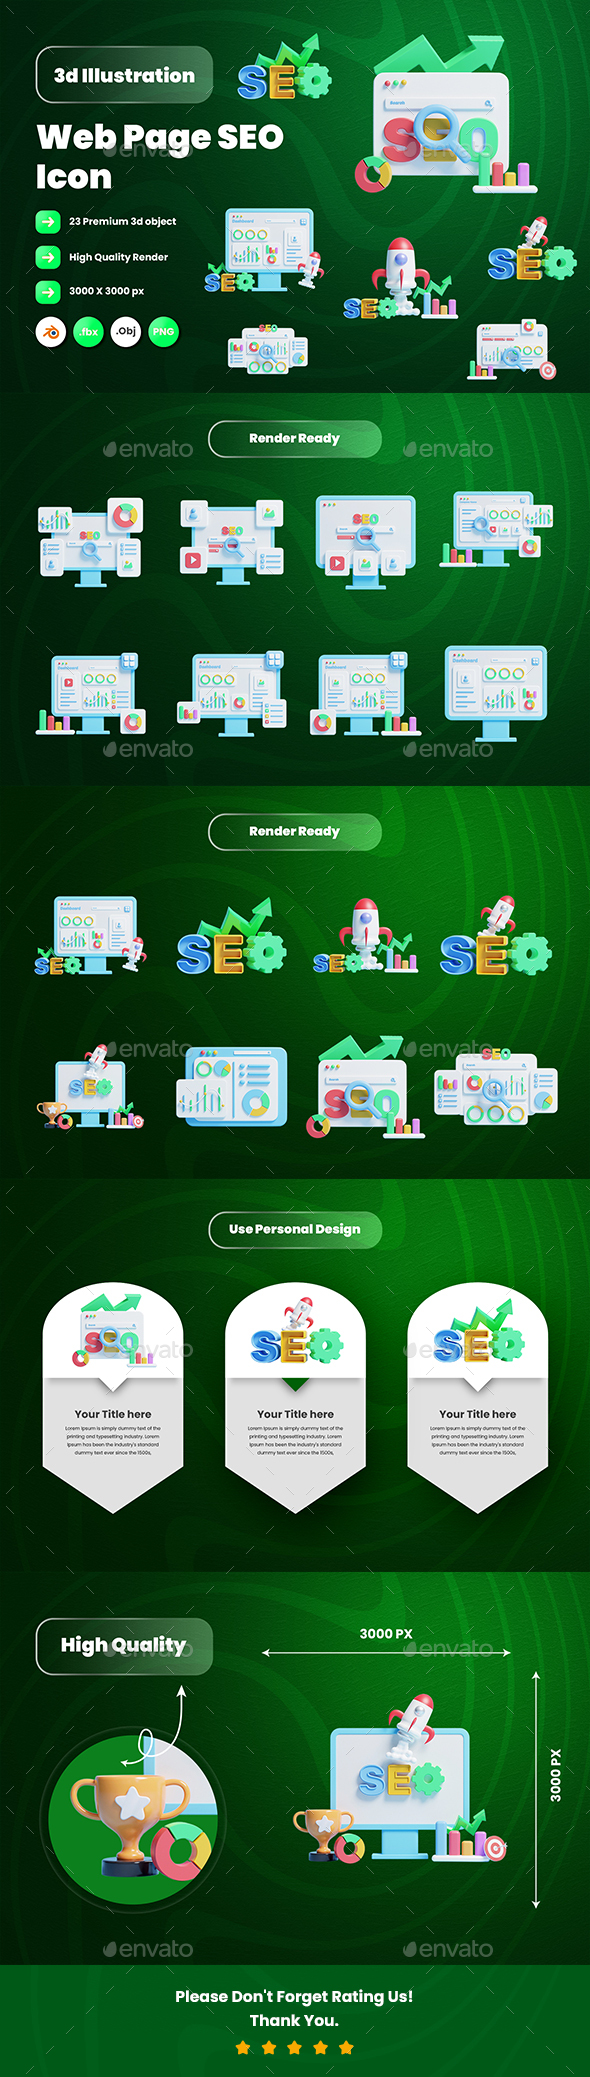 [DOWNLOAD]Web page SEO 3d Illustration Icon Pack